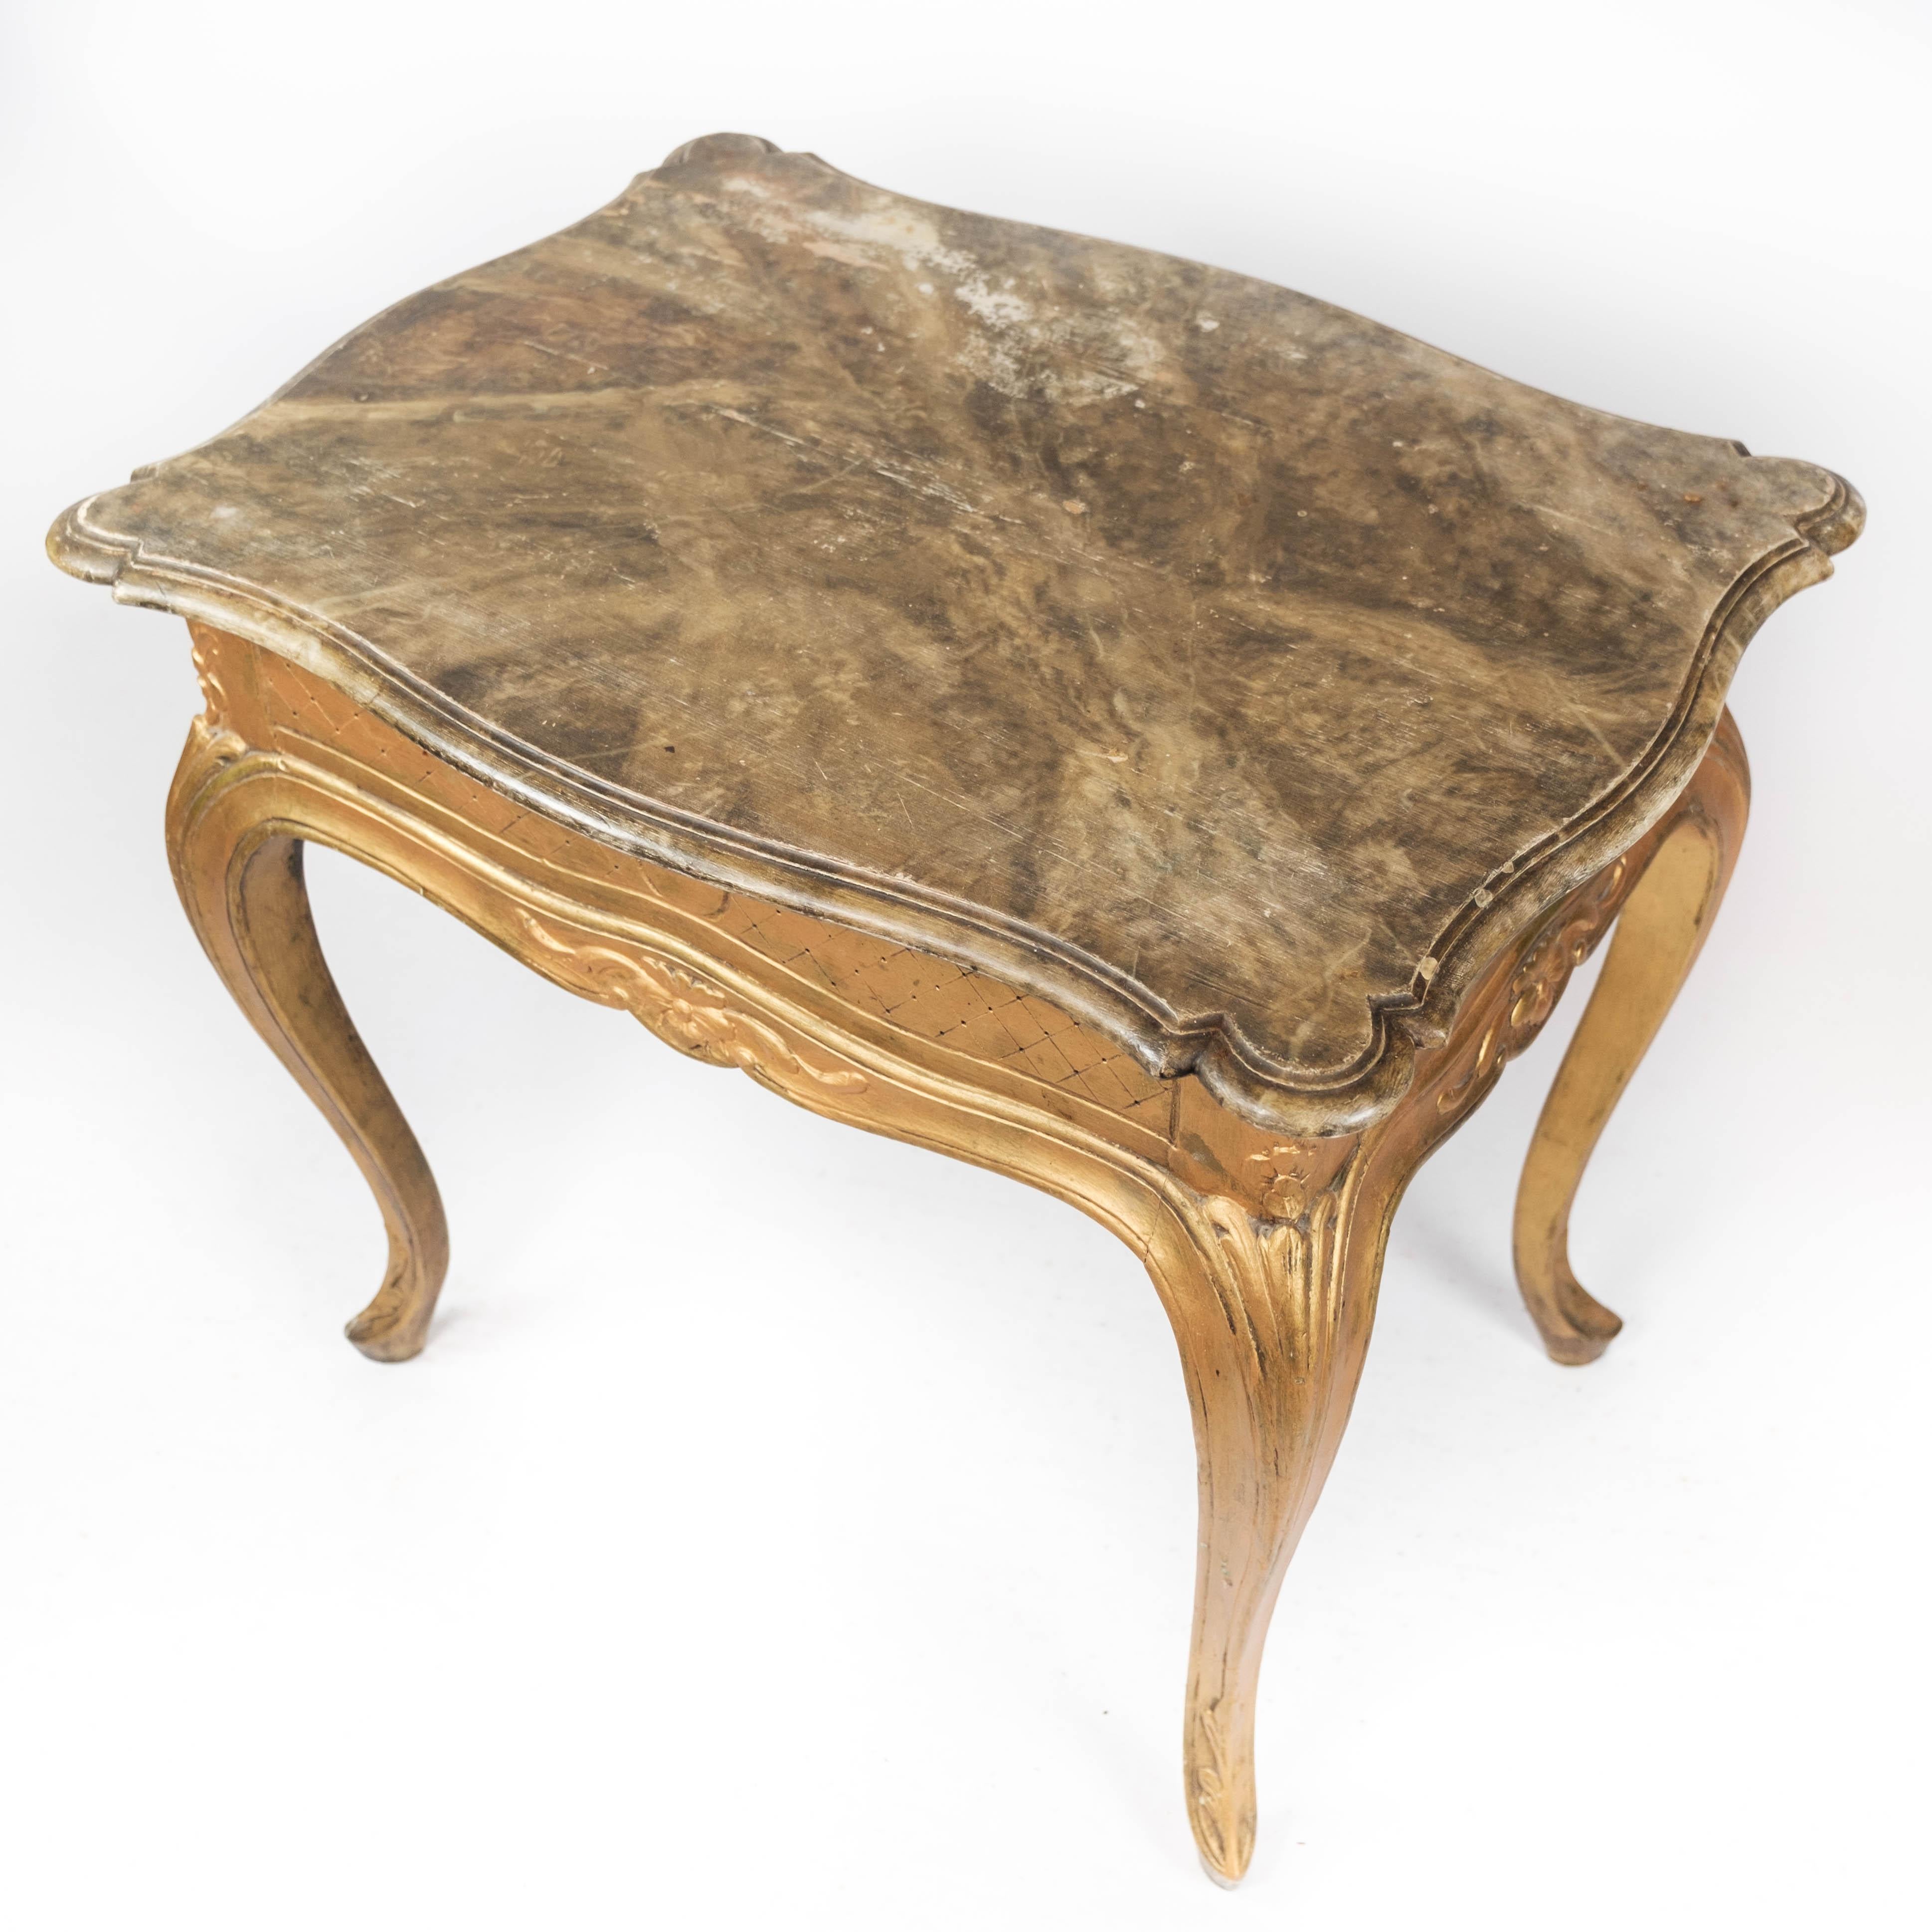 Rococo Revival Side Table with Marbled Tabletop and Frame of Gilded Wood, 1860s For Sale 1